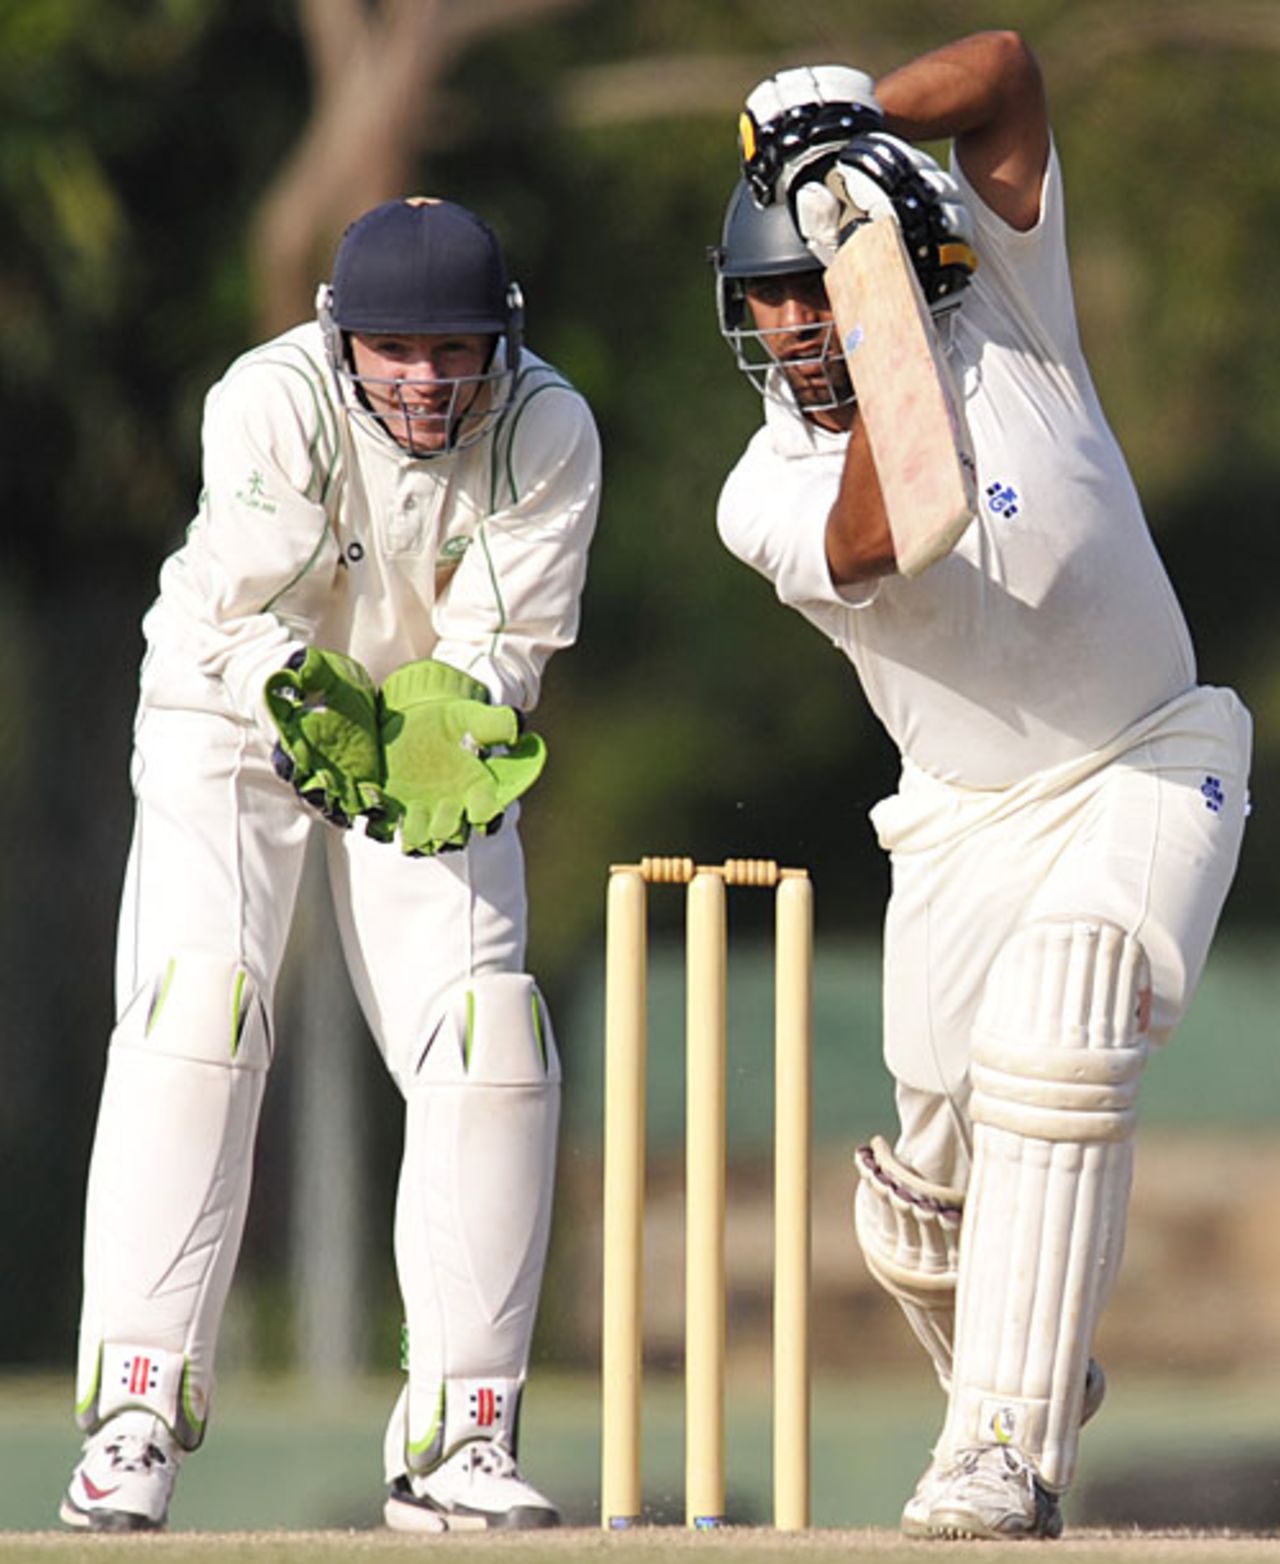 Noor Ali plays on the up, Afghanistan v Ireland, ICC Intercontinental Cup, Dambulla, 4th day, January 24, 2010